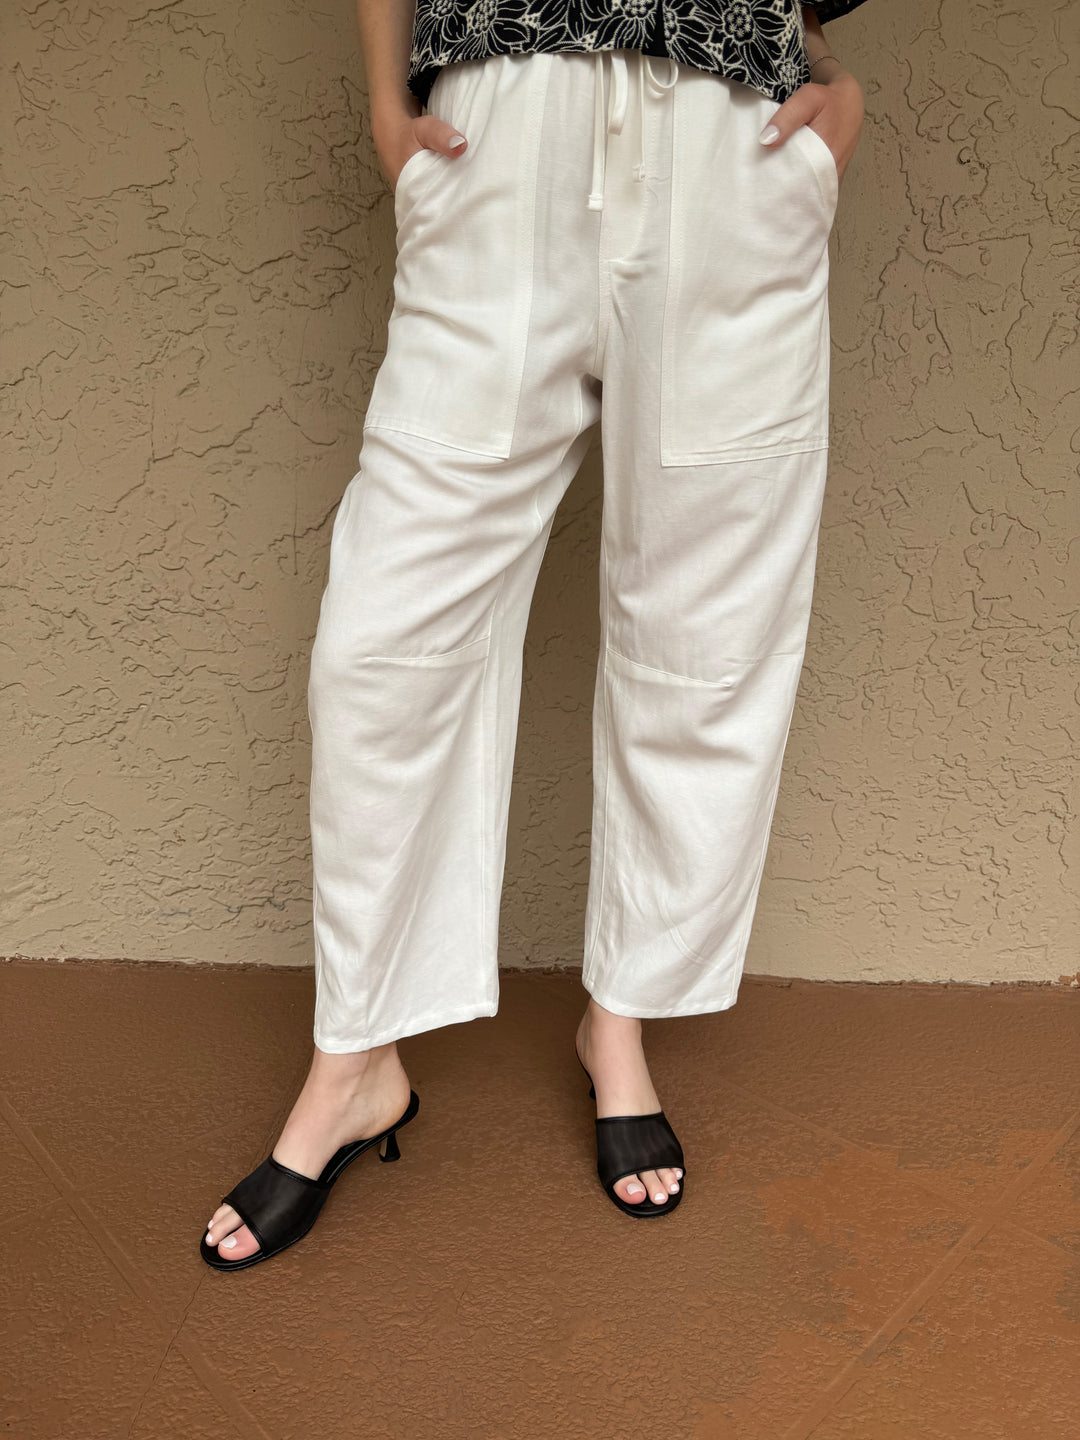 Enza Costa Twill Utility Pants in Off White